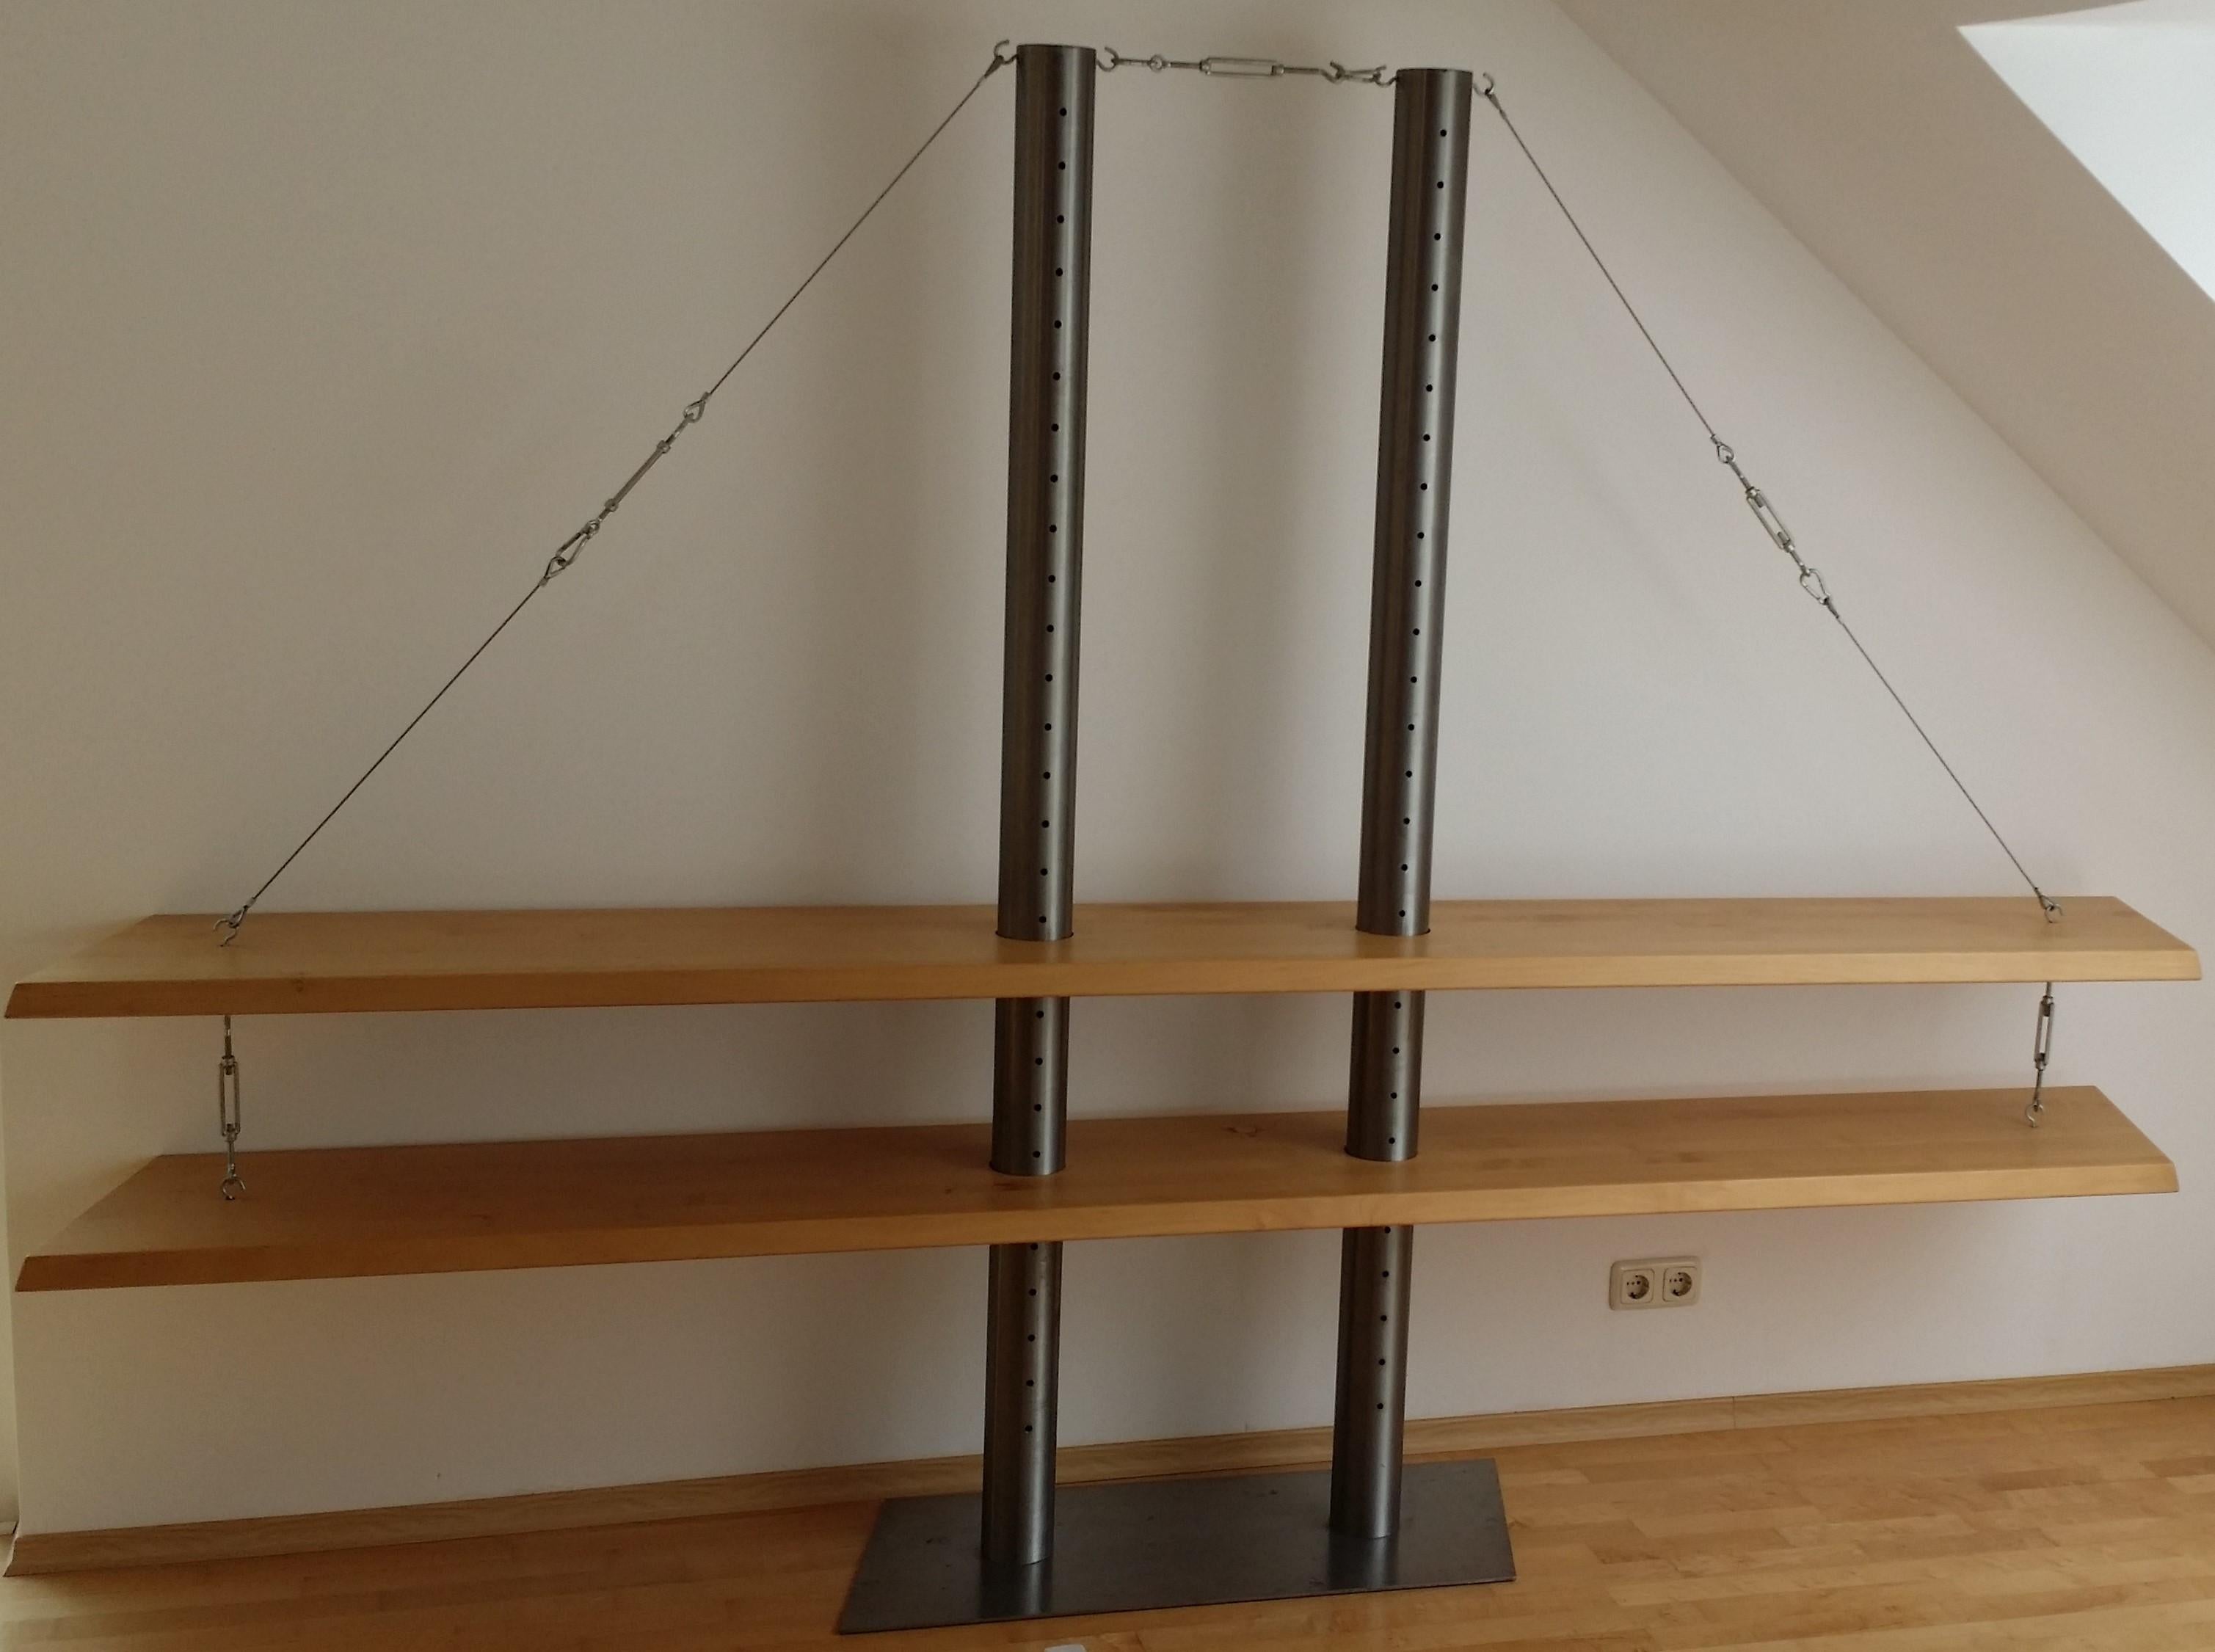 Wonderful standing shelf modeled after the Golden Gate Bridge.
Designed by an artist from Muenster / Germany as an absolute unique single piece - there is no second one in the world.
The shelf consists of a stainless steel base, two stainless